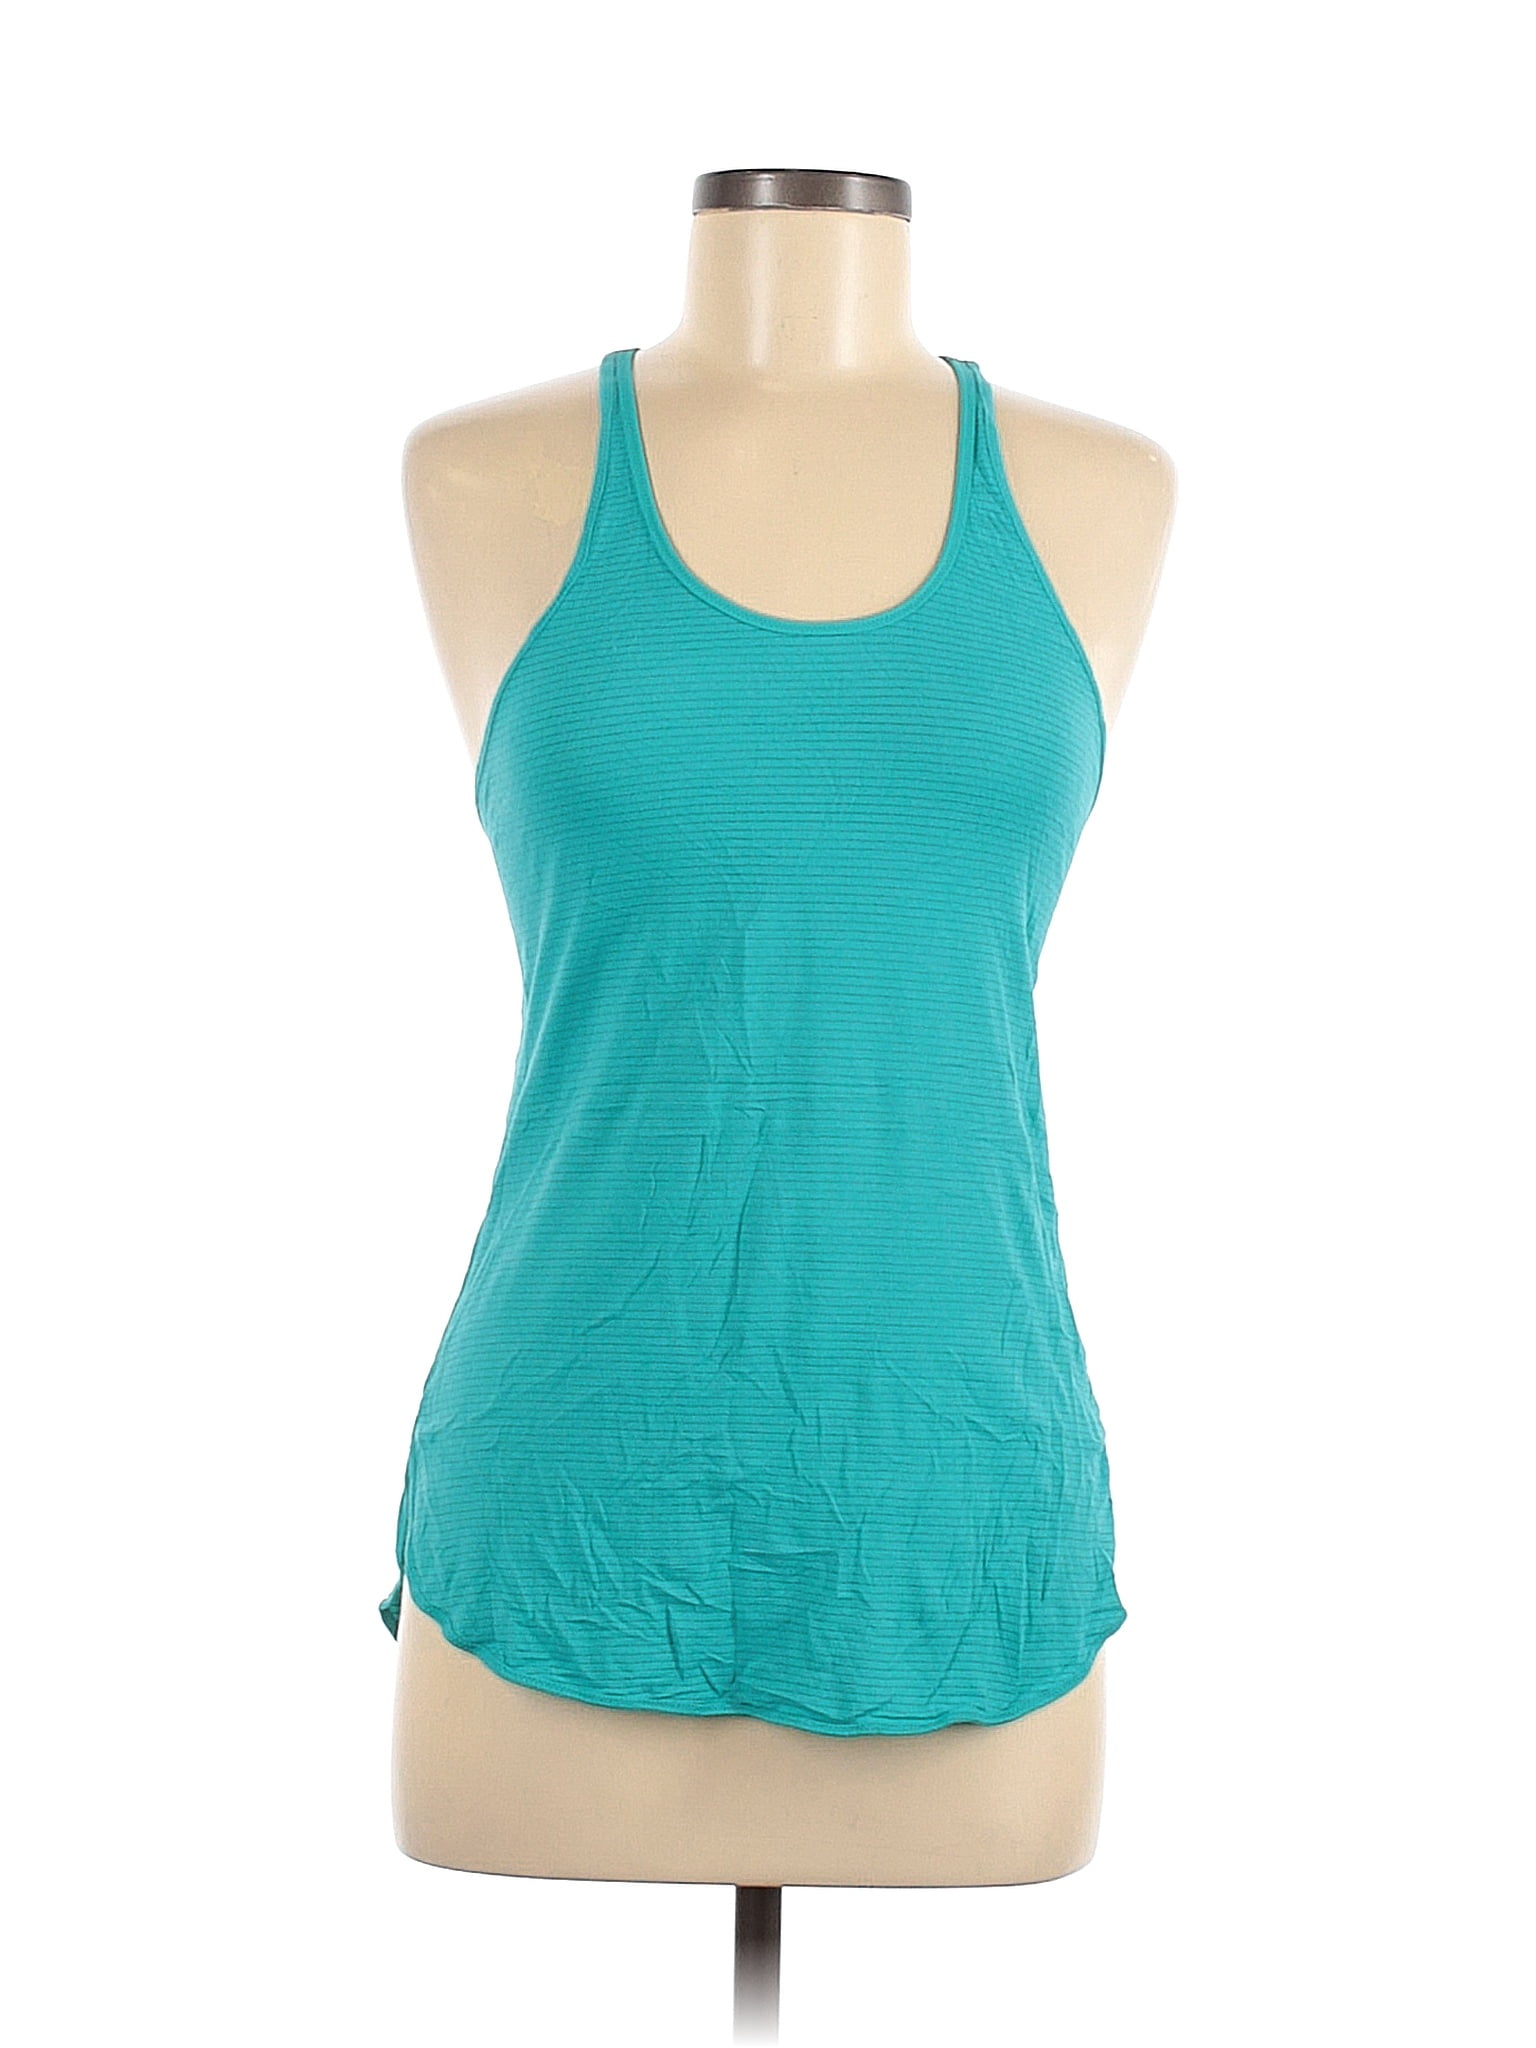 Pre-Owned Lululemon Athletica Womens Size 8 Tank Top Nigeria